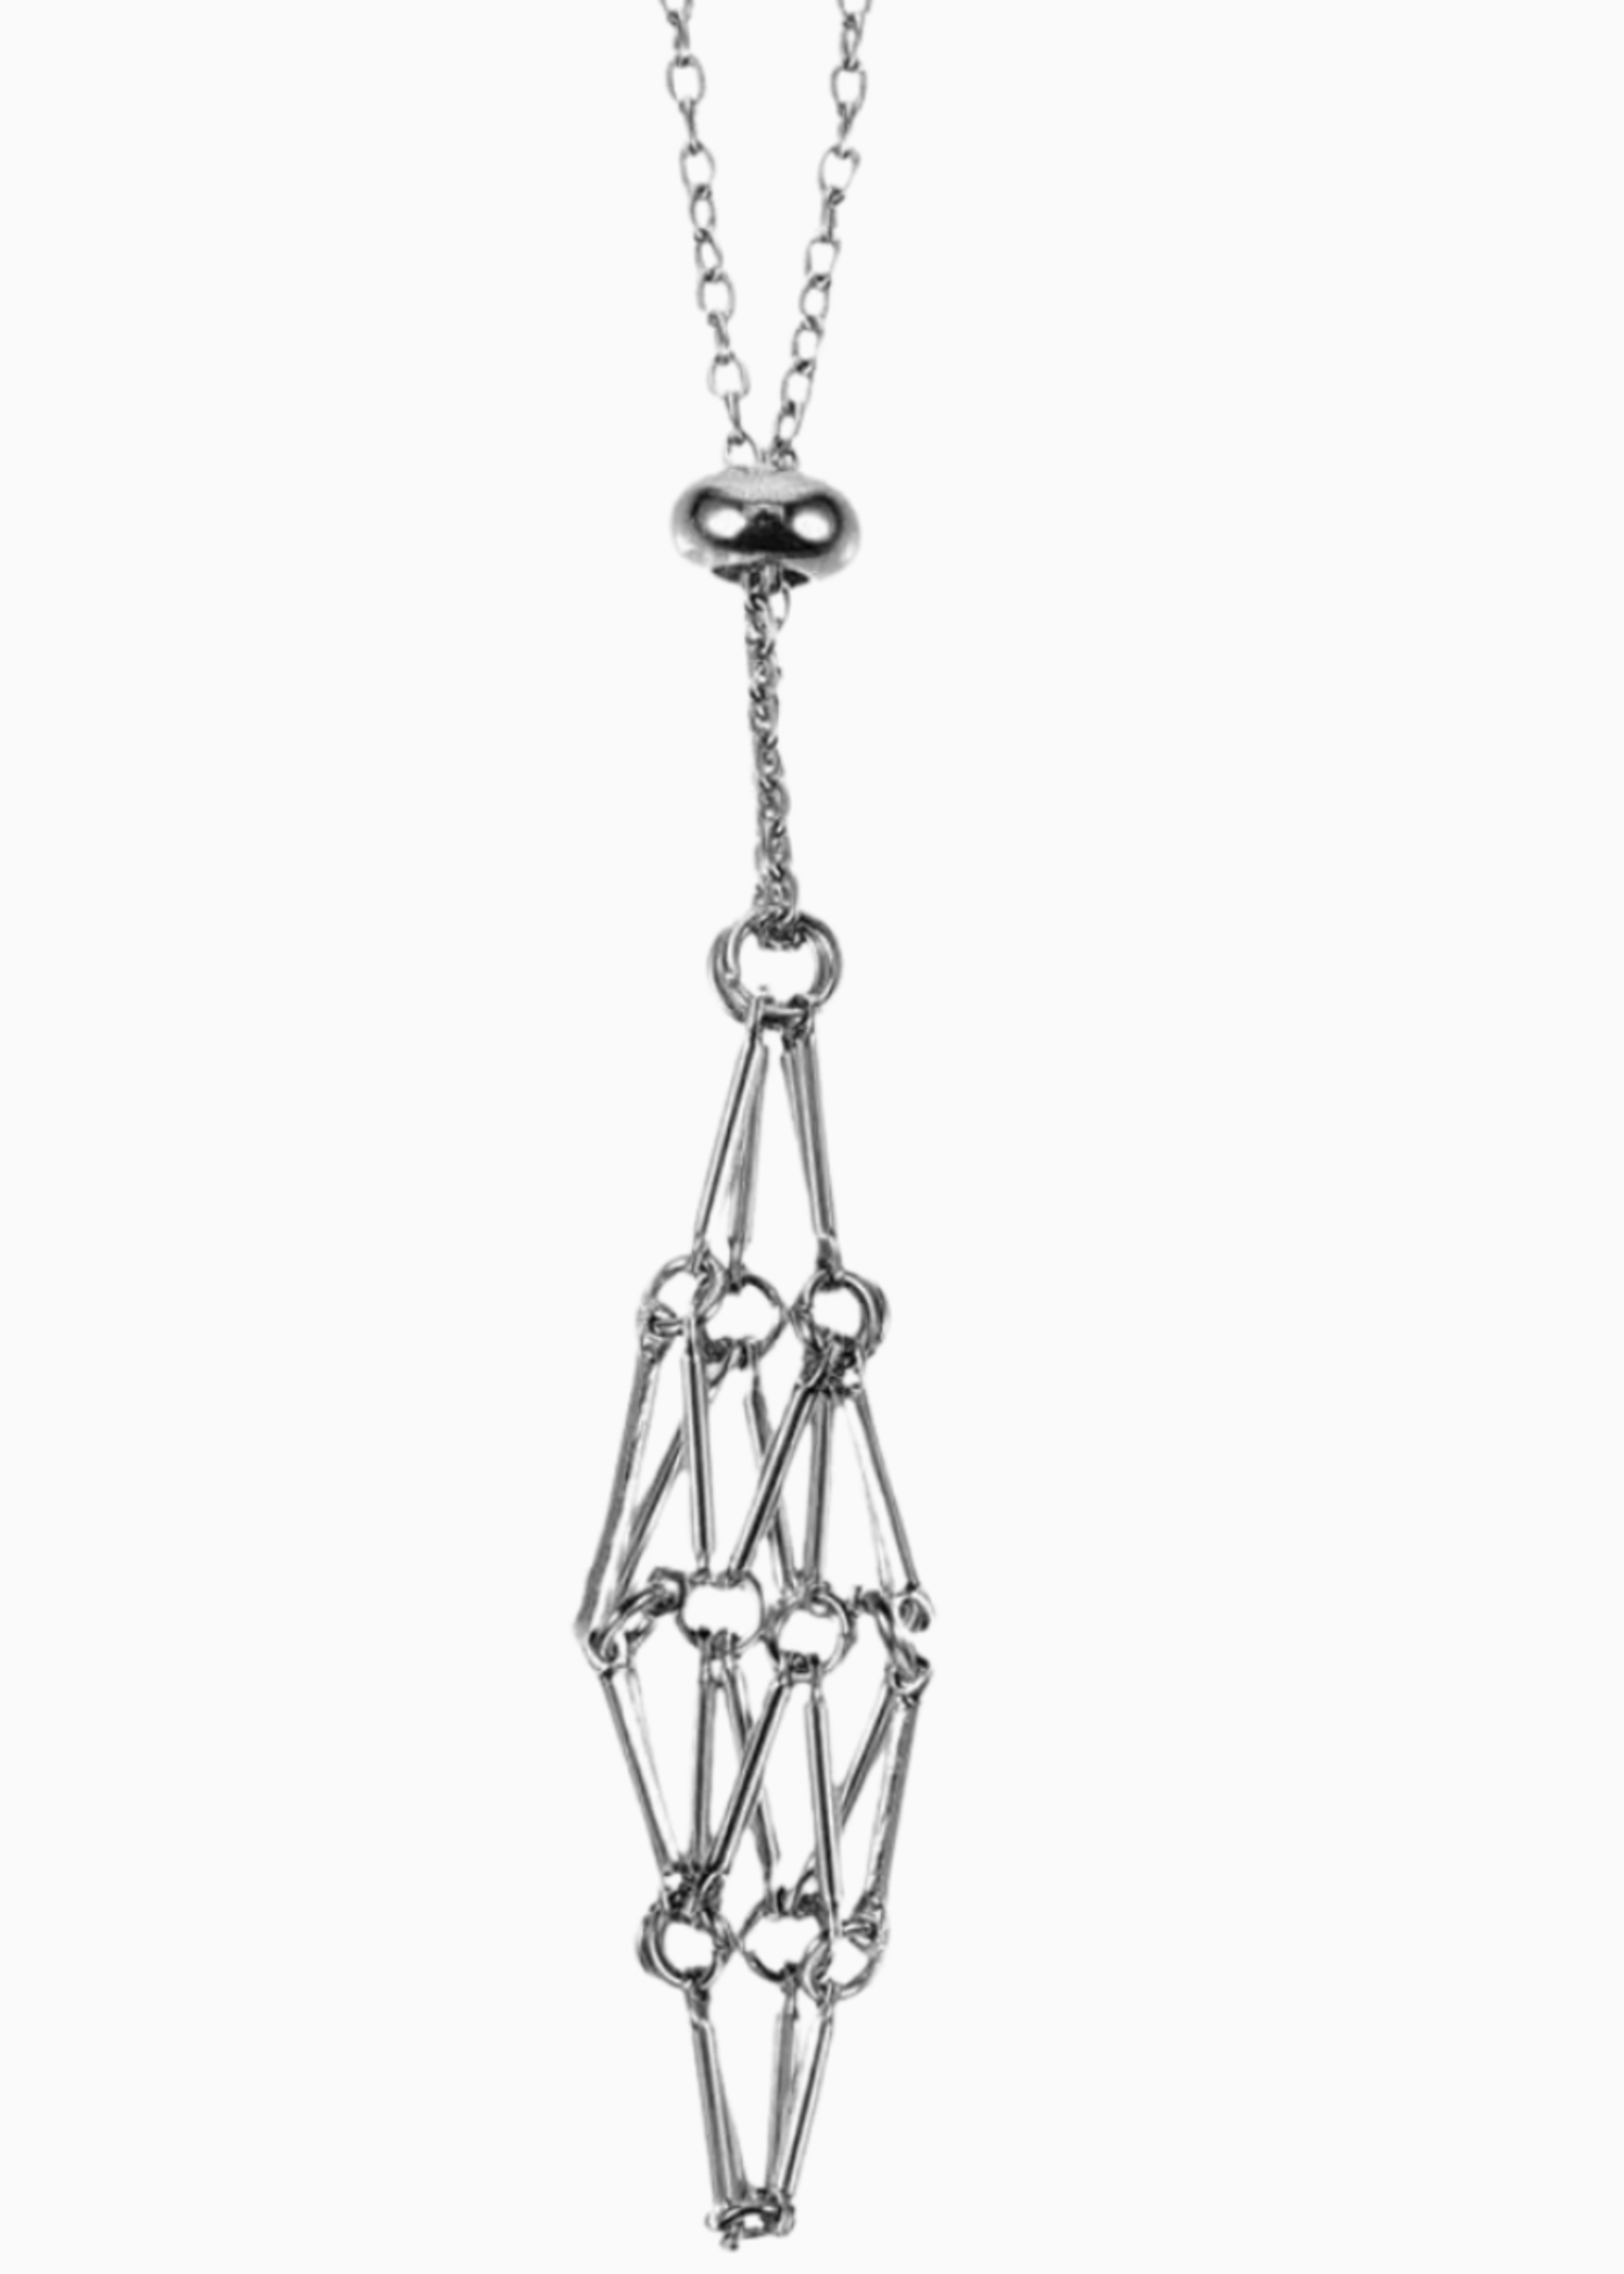 Down to Earth Adjustable Metal Crystal Necklace Holder